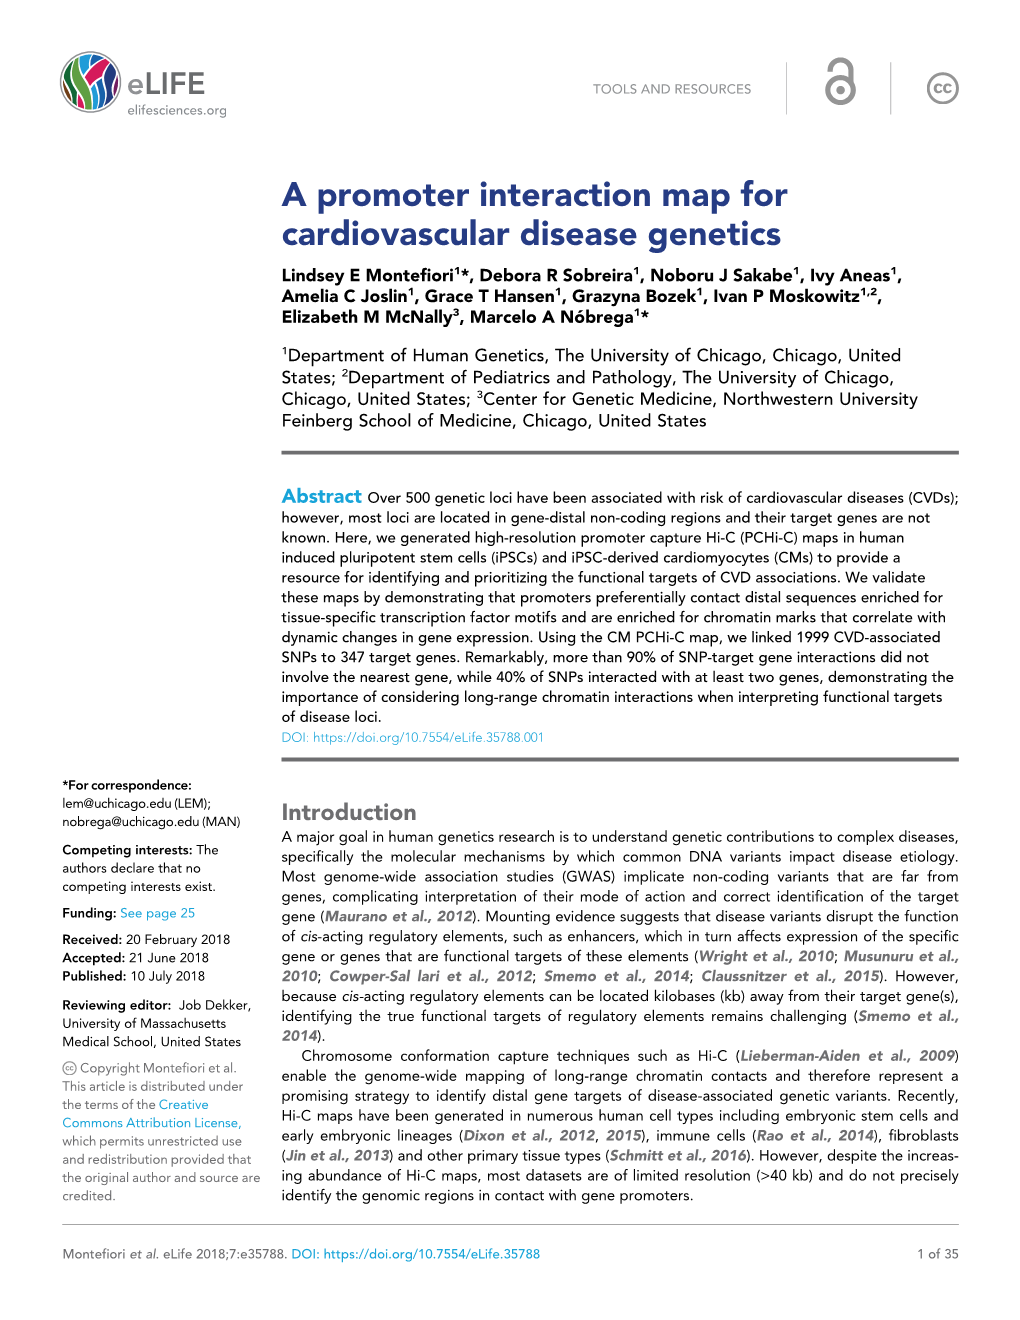 A Promoter Interaction Map for Cardiovascular Disease Genetics